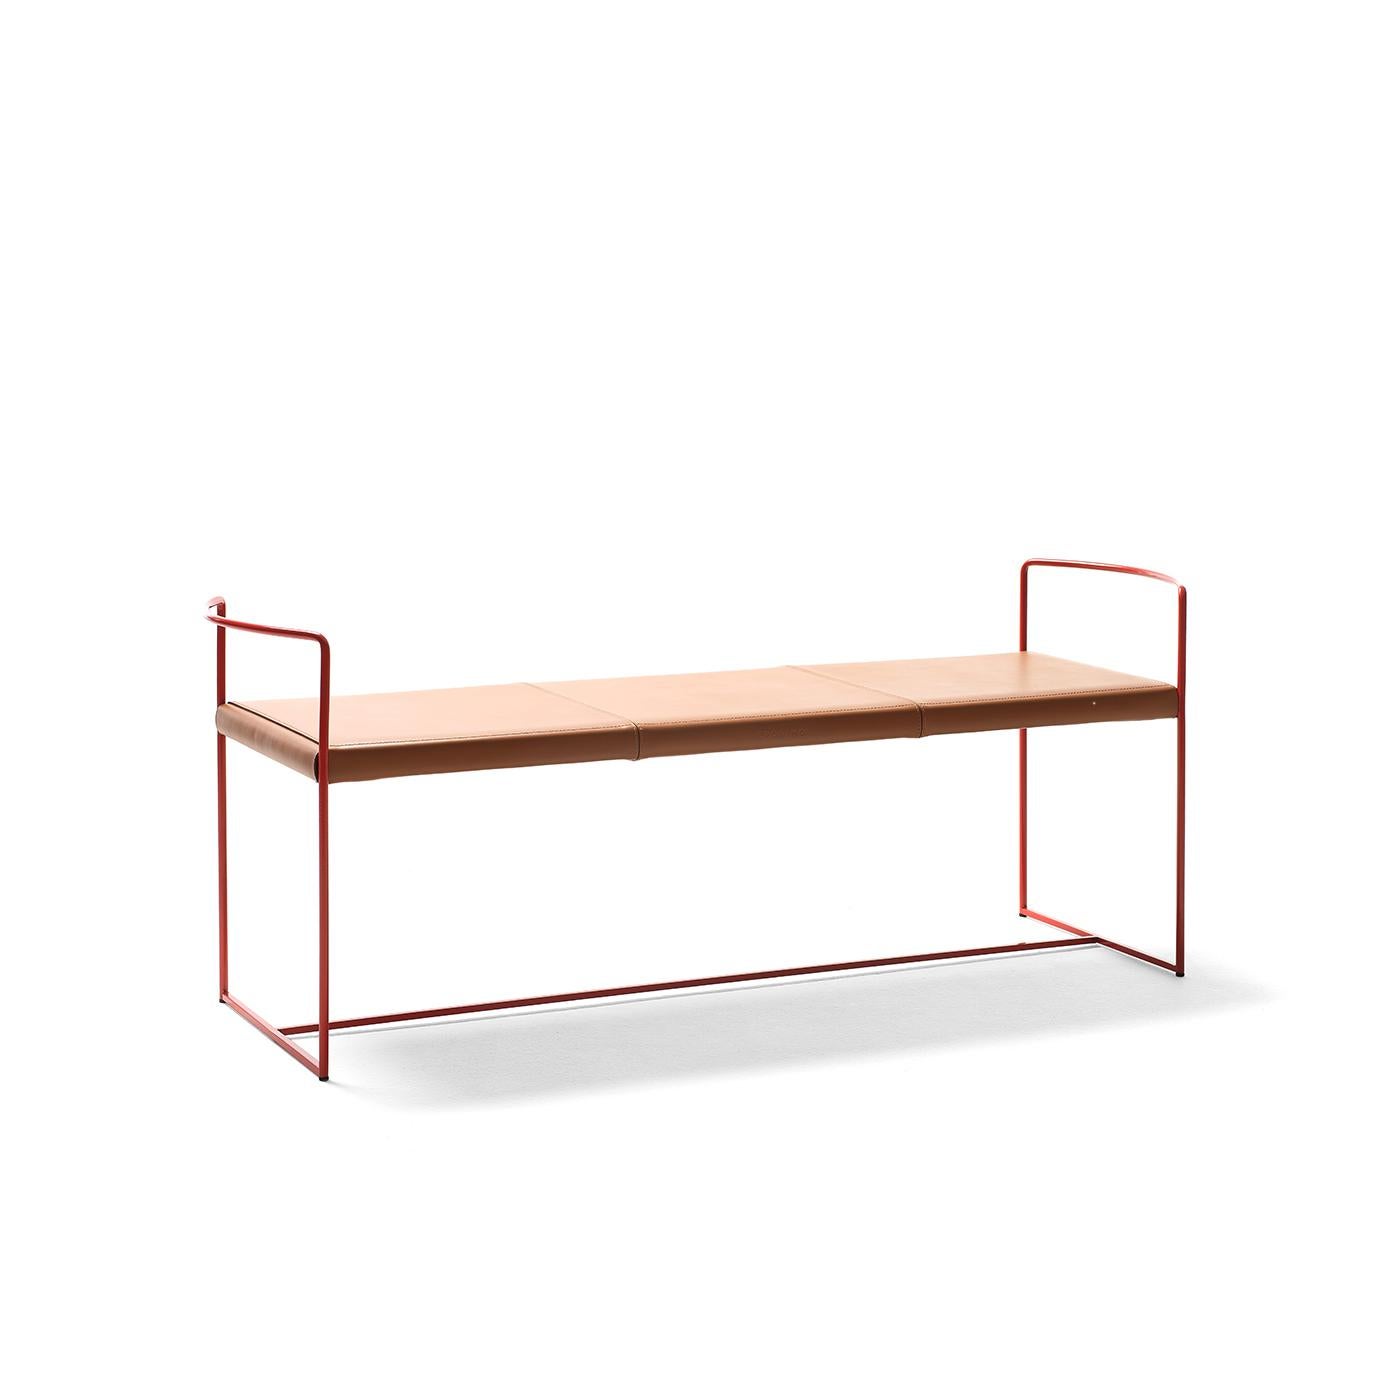 As suggested by its name, this graceful bench stands out for the unparalleled lightness of its minimalist frame in red-lacquered steel. Luxe, brown cowhide with exposed stitching covers the seat, which is framed by two delicate armrests with a